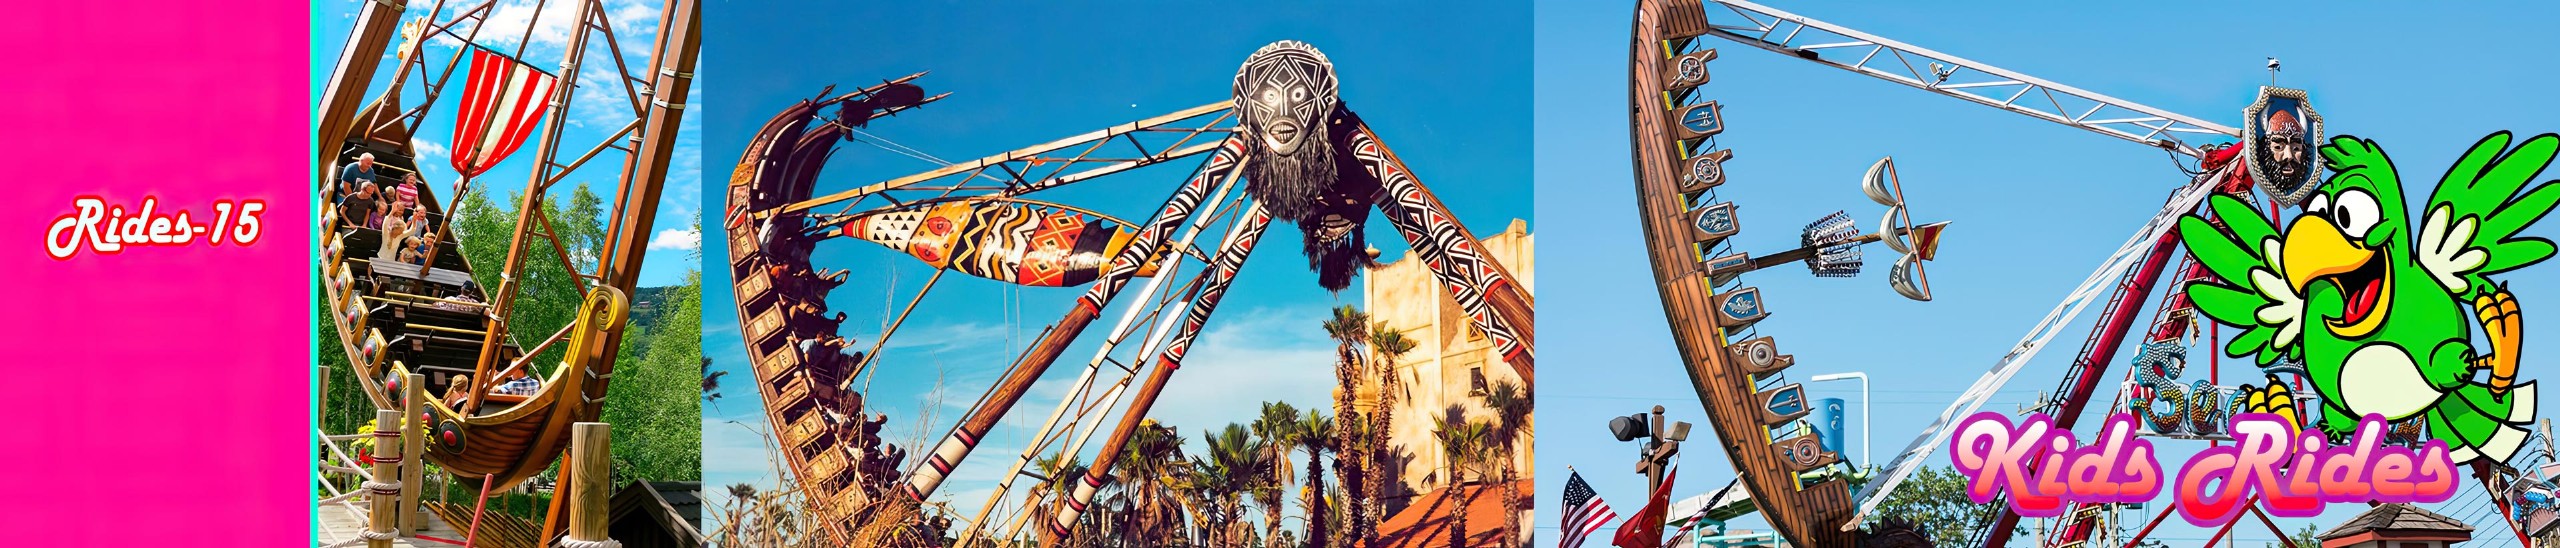 international attractions  rides rollercoasters for theme parks 15